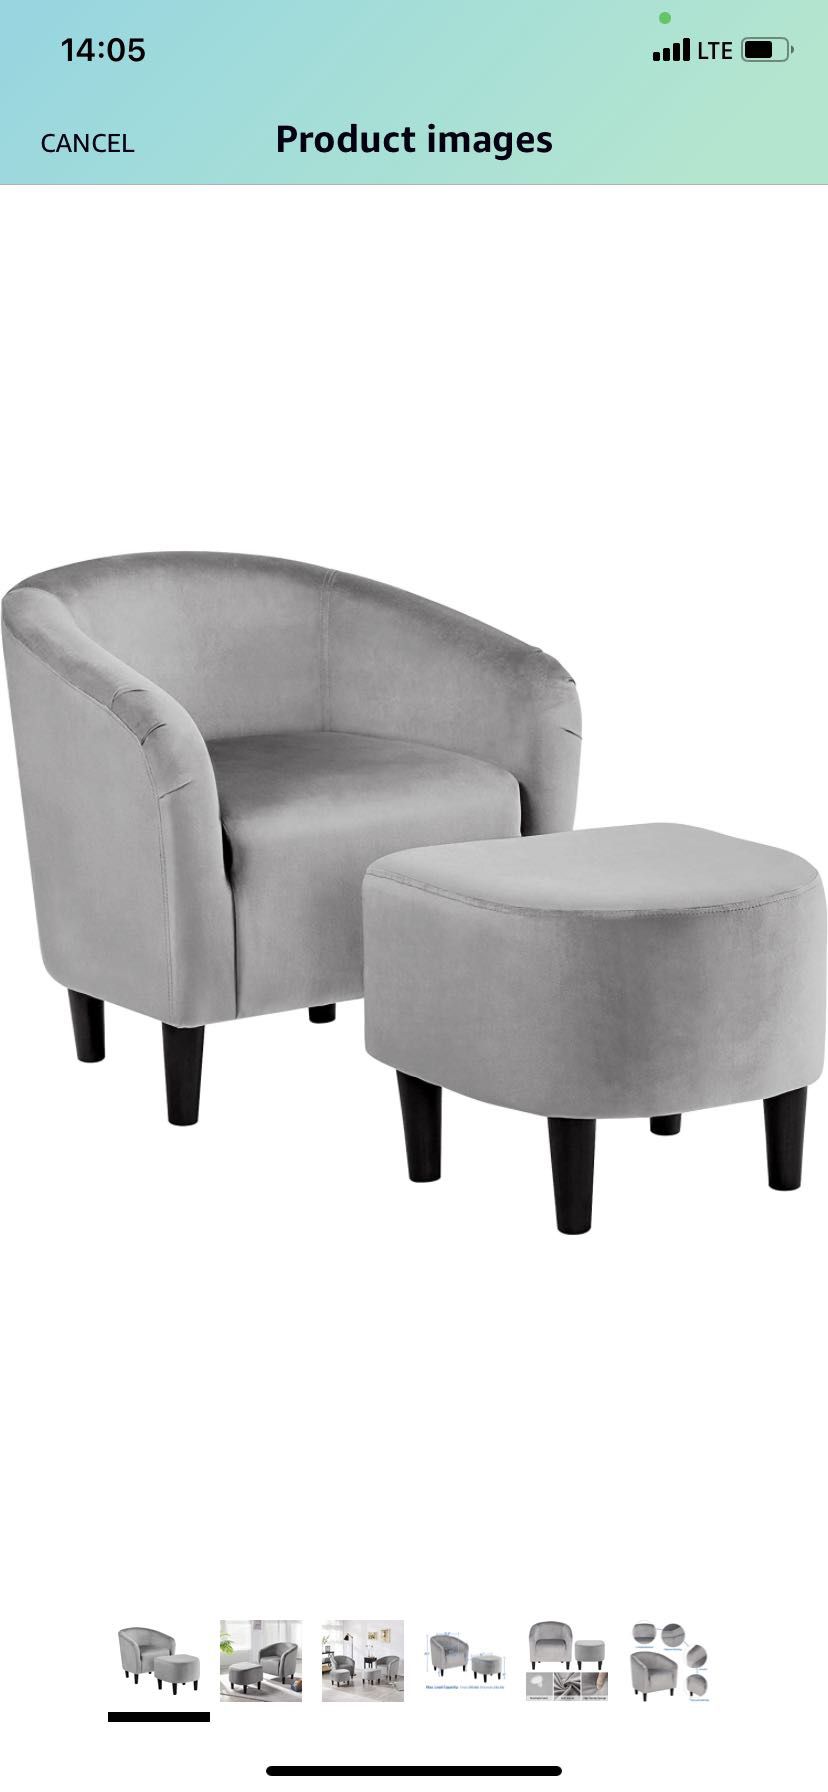  Accent Chair with Ottoman Foot Rest, Mid Century Modern Upholstered Soft Barrel Chair Comfy Fabric Armchair and Footrest Set for Living Room/Bedroom/